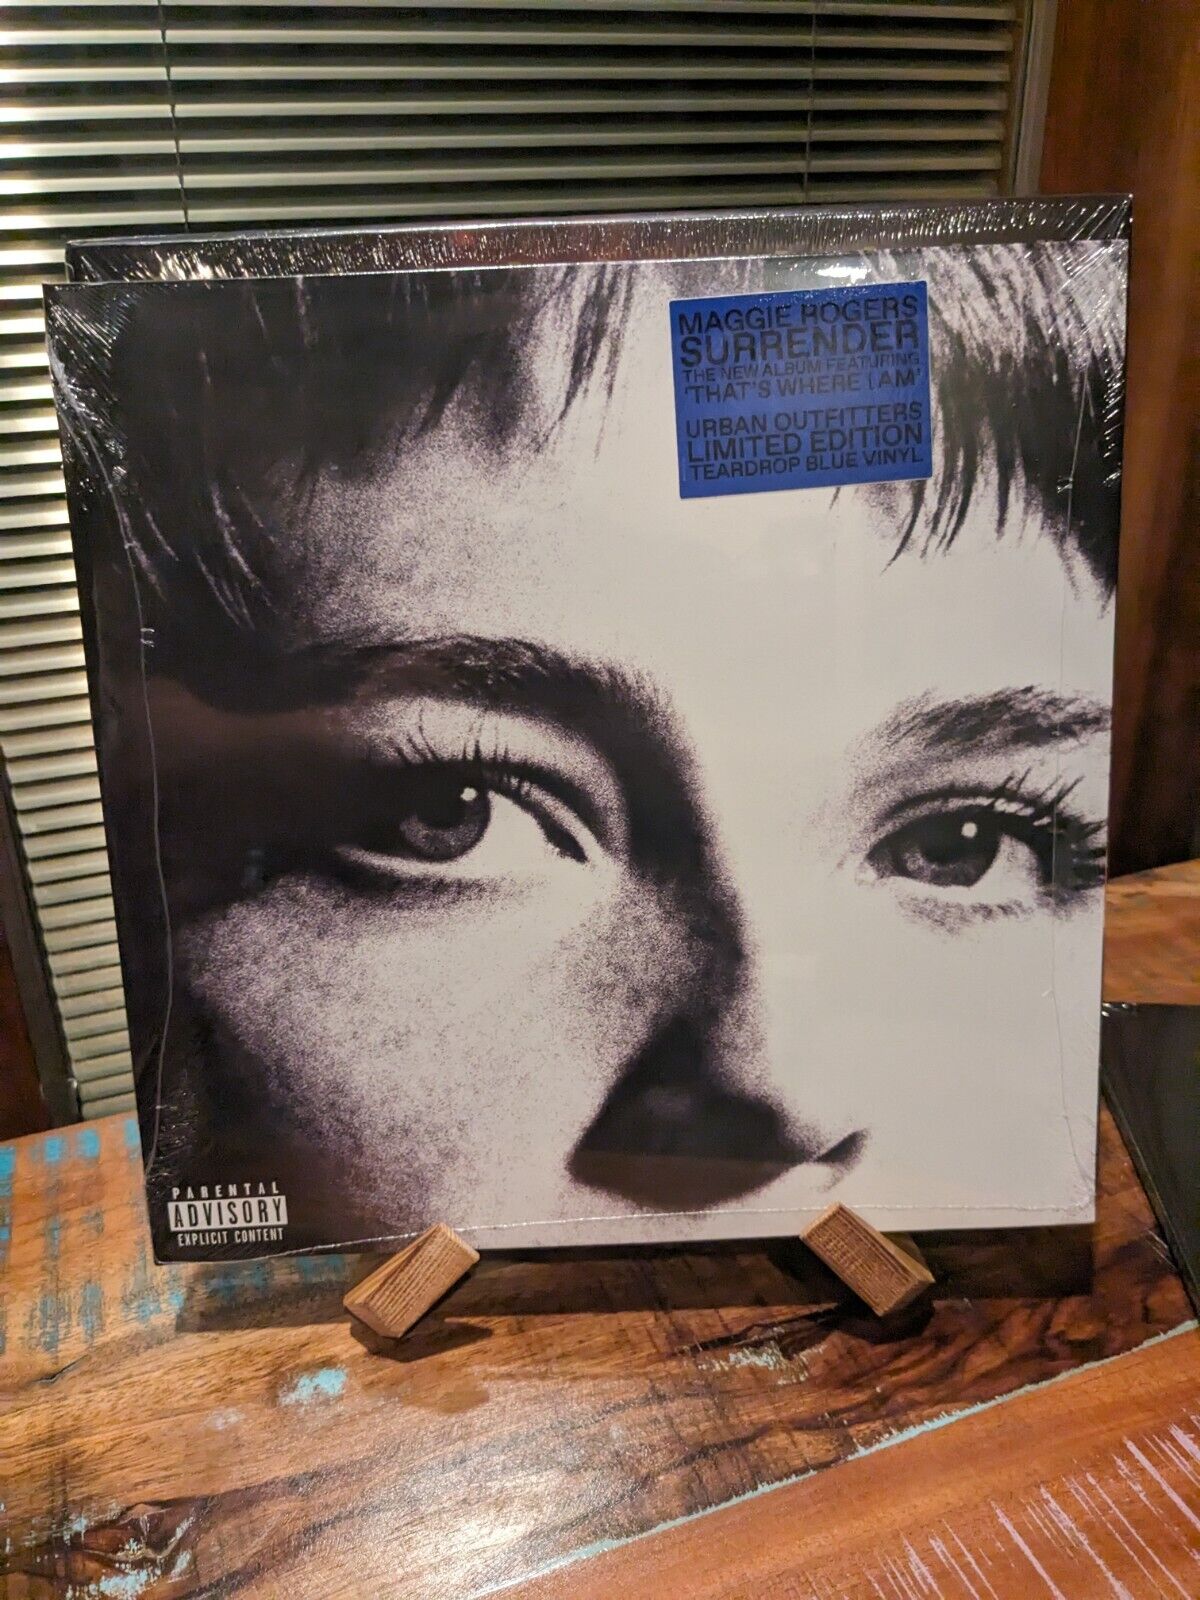 Maggie Rodgers Surrender URBAN OUTFITTERS BLUE VINYL NEW